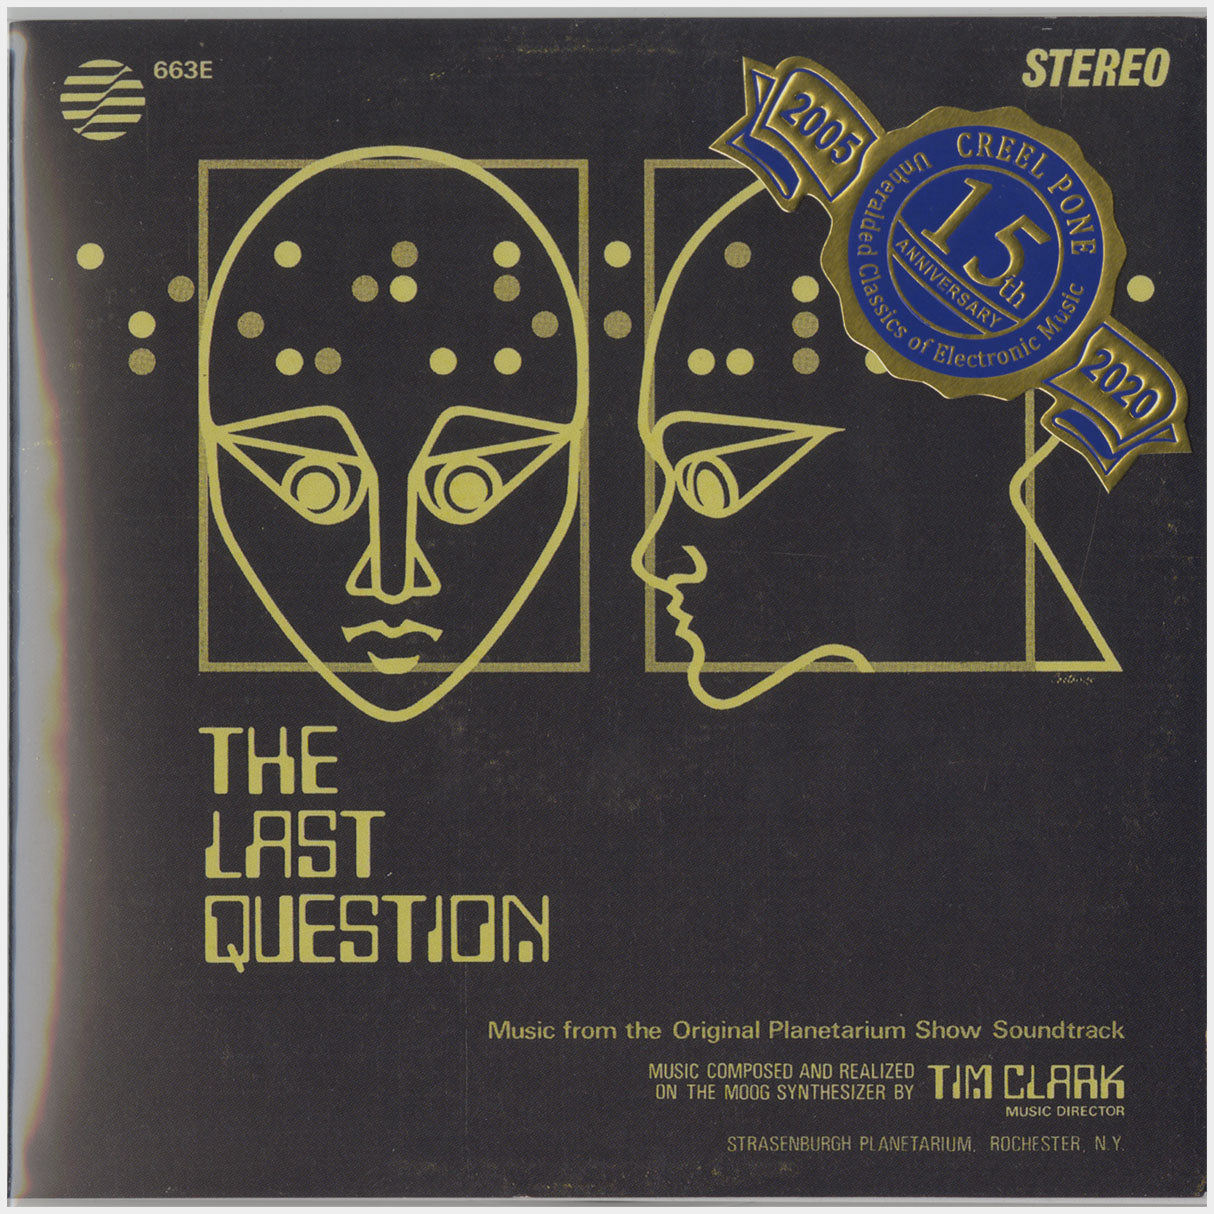 [CP 226 CD] Tim Clark; The Last Question +